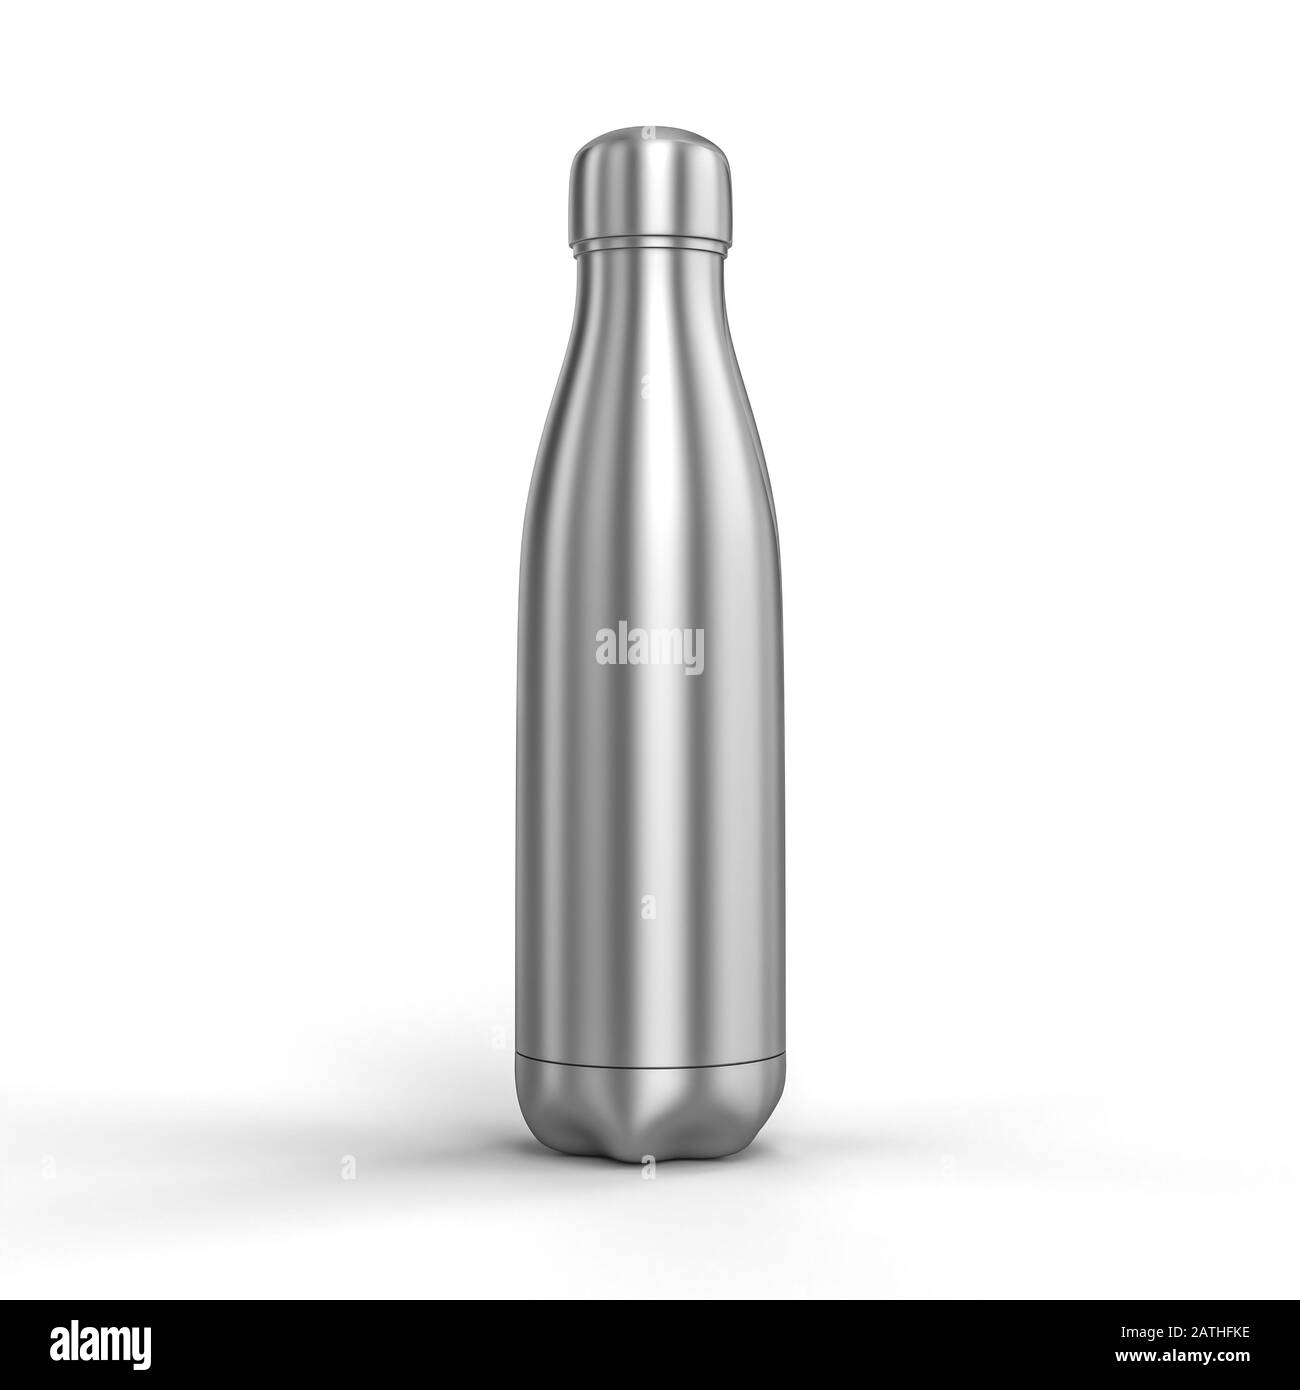 3d render image of a thermal stainless steel bottle. concept of reuse and ecology against excessive use of plastic. Stock Photo